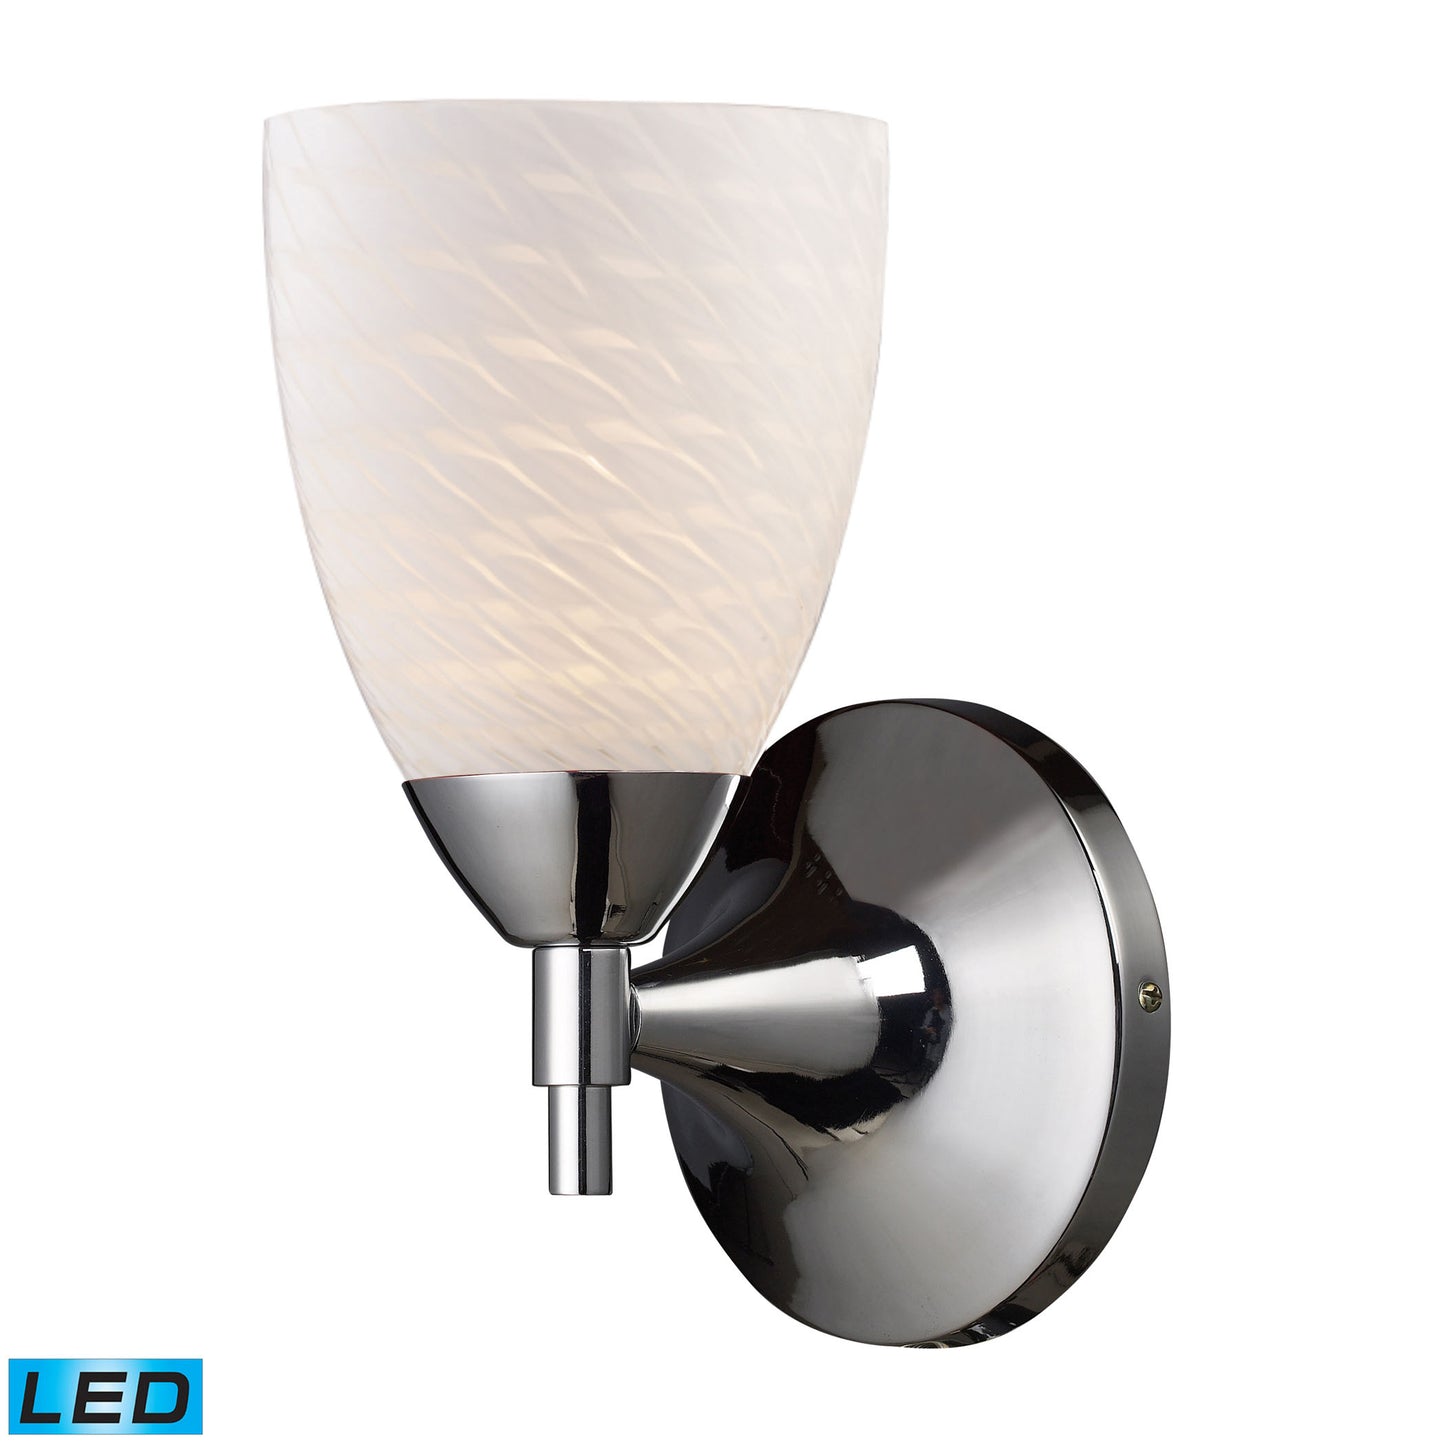 Celina 1-Light Wall Lamp in Polished Chrome with White Swirl Glass - Includes LED Bulb